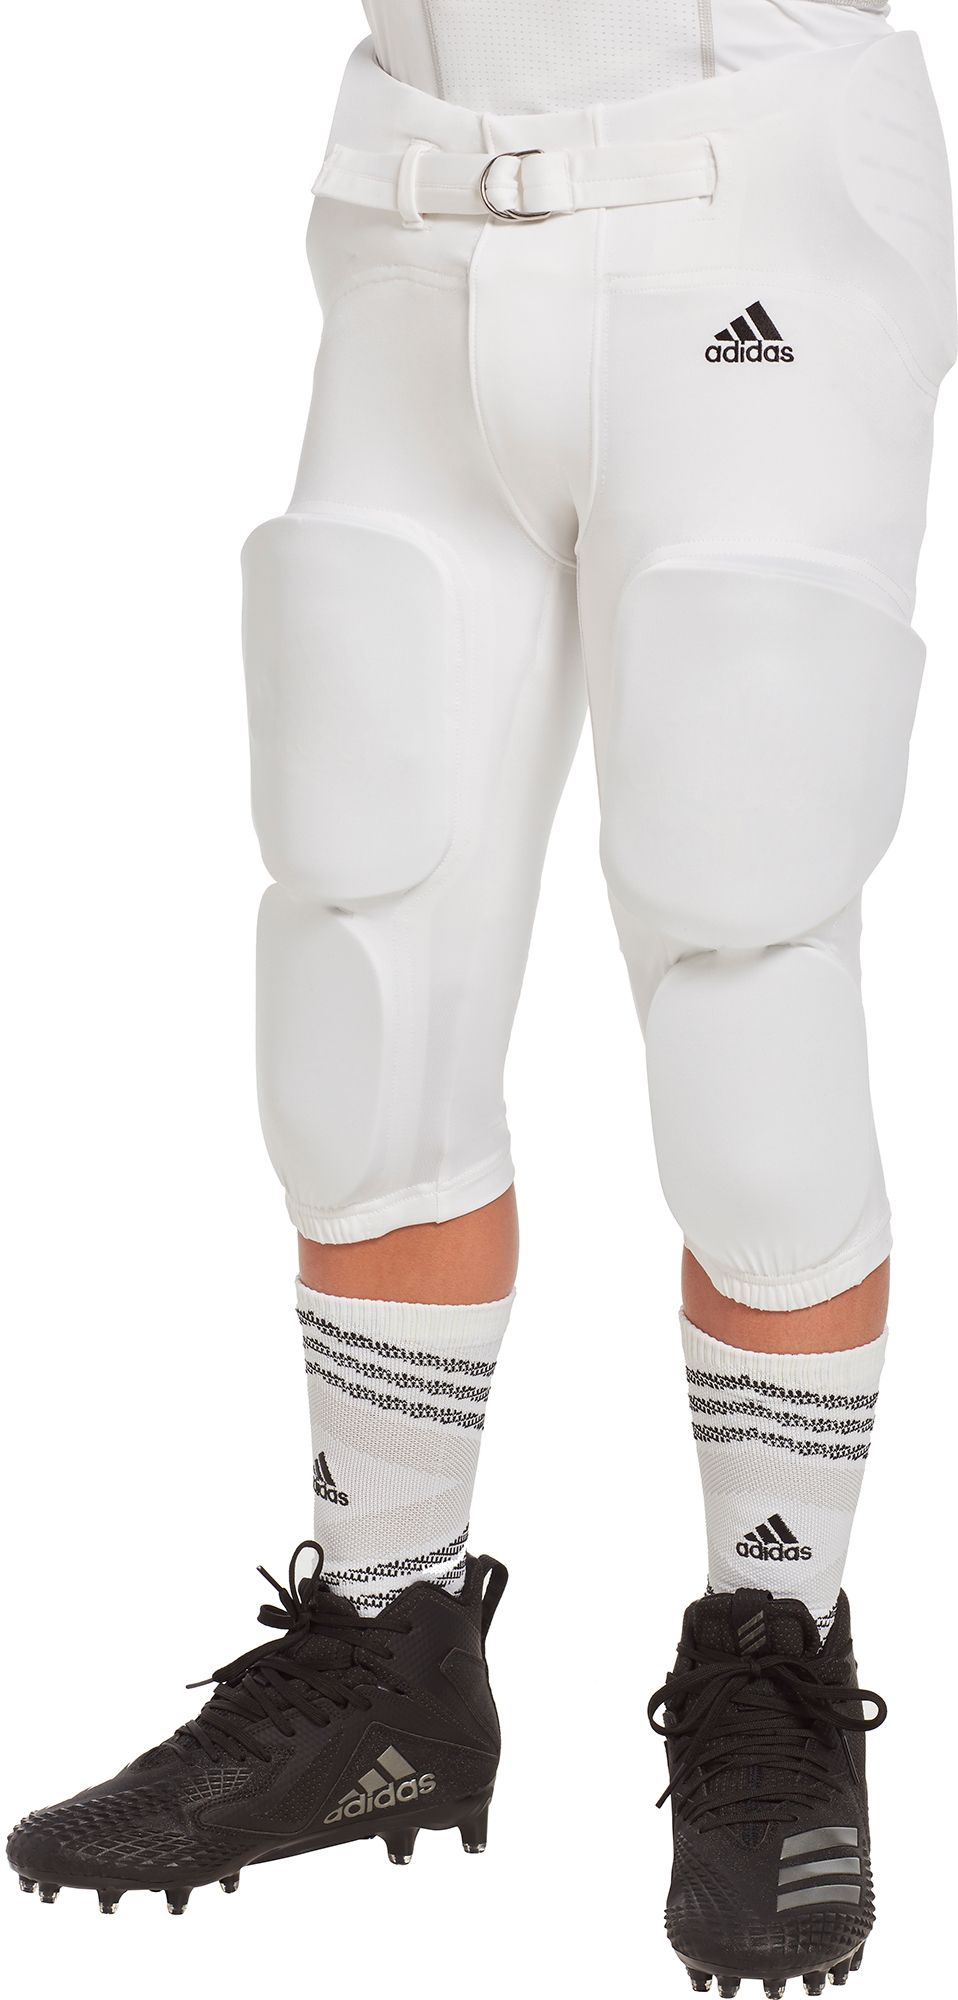 adidas youth compression tights